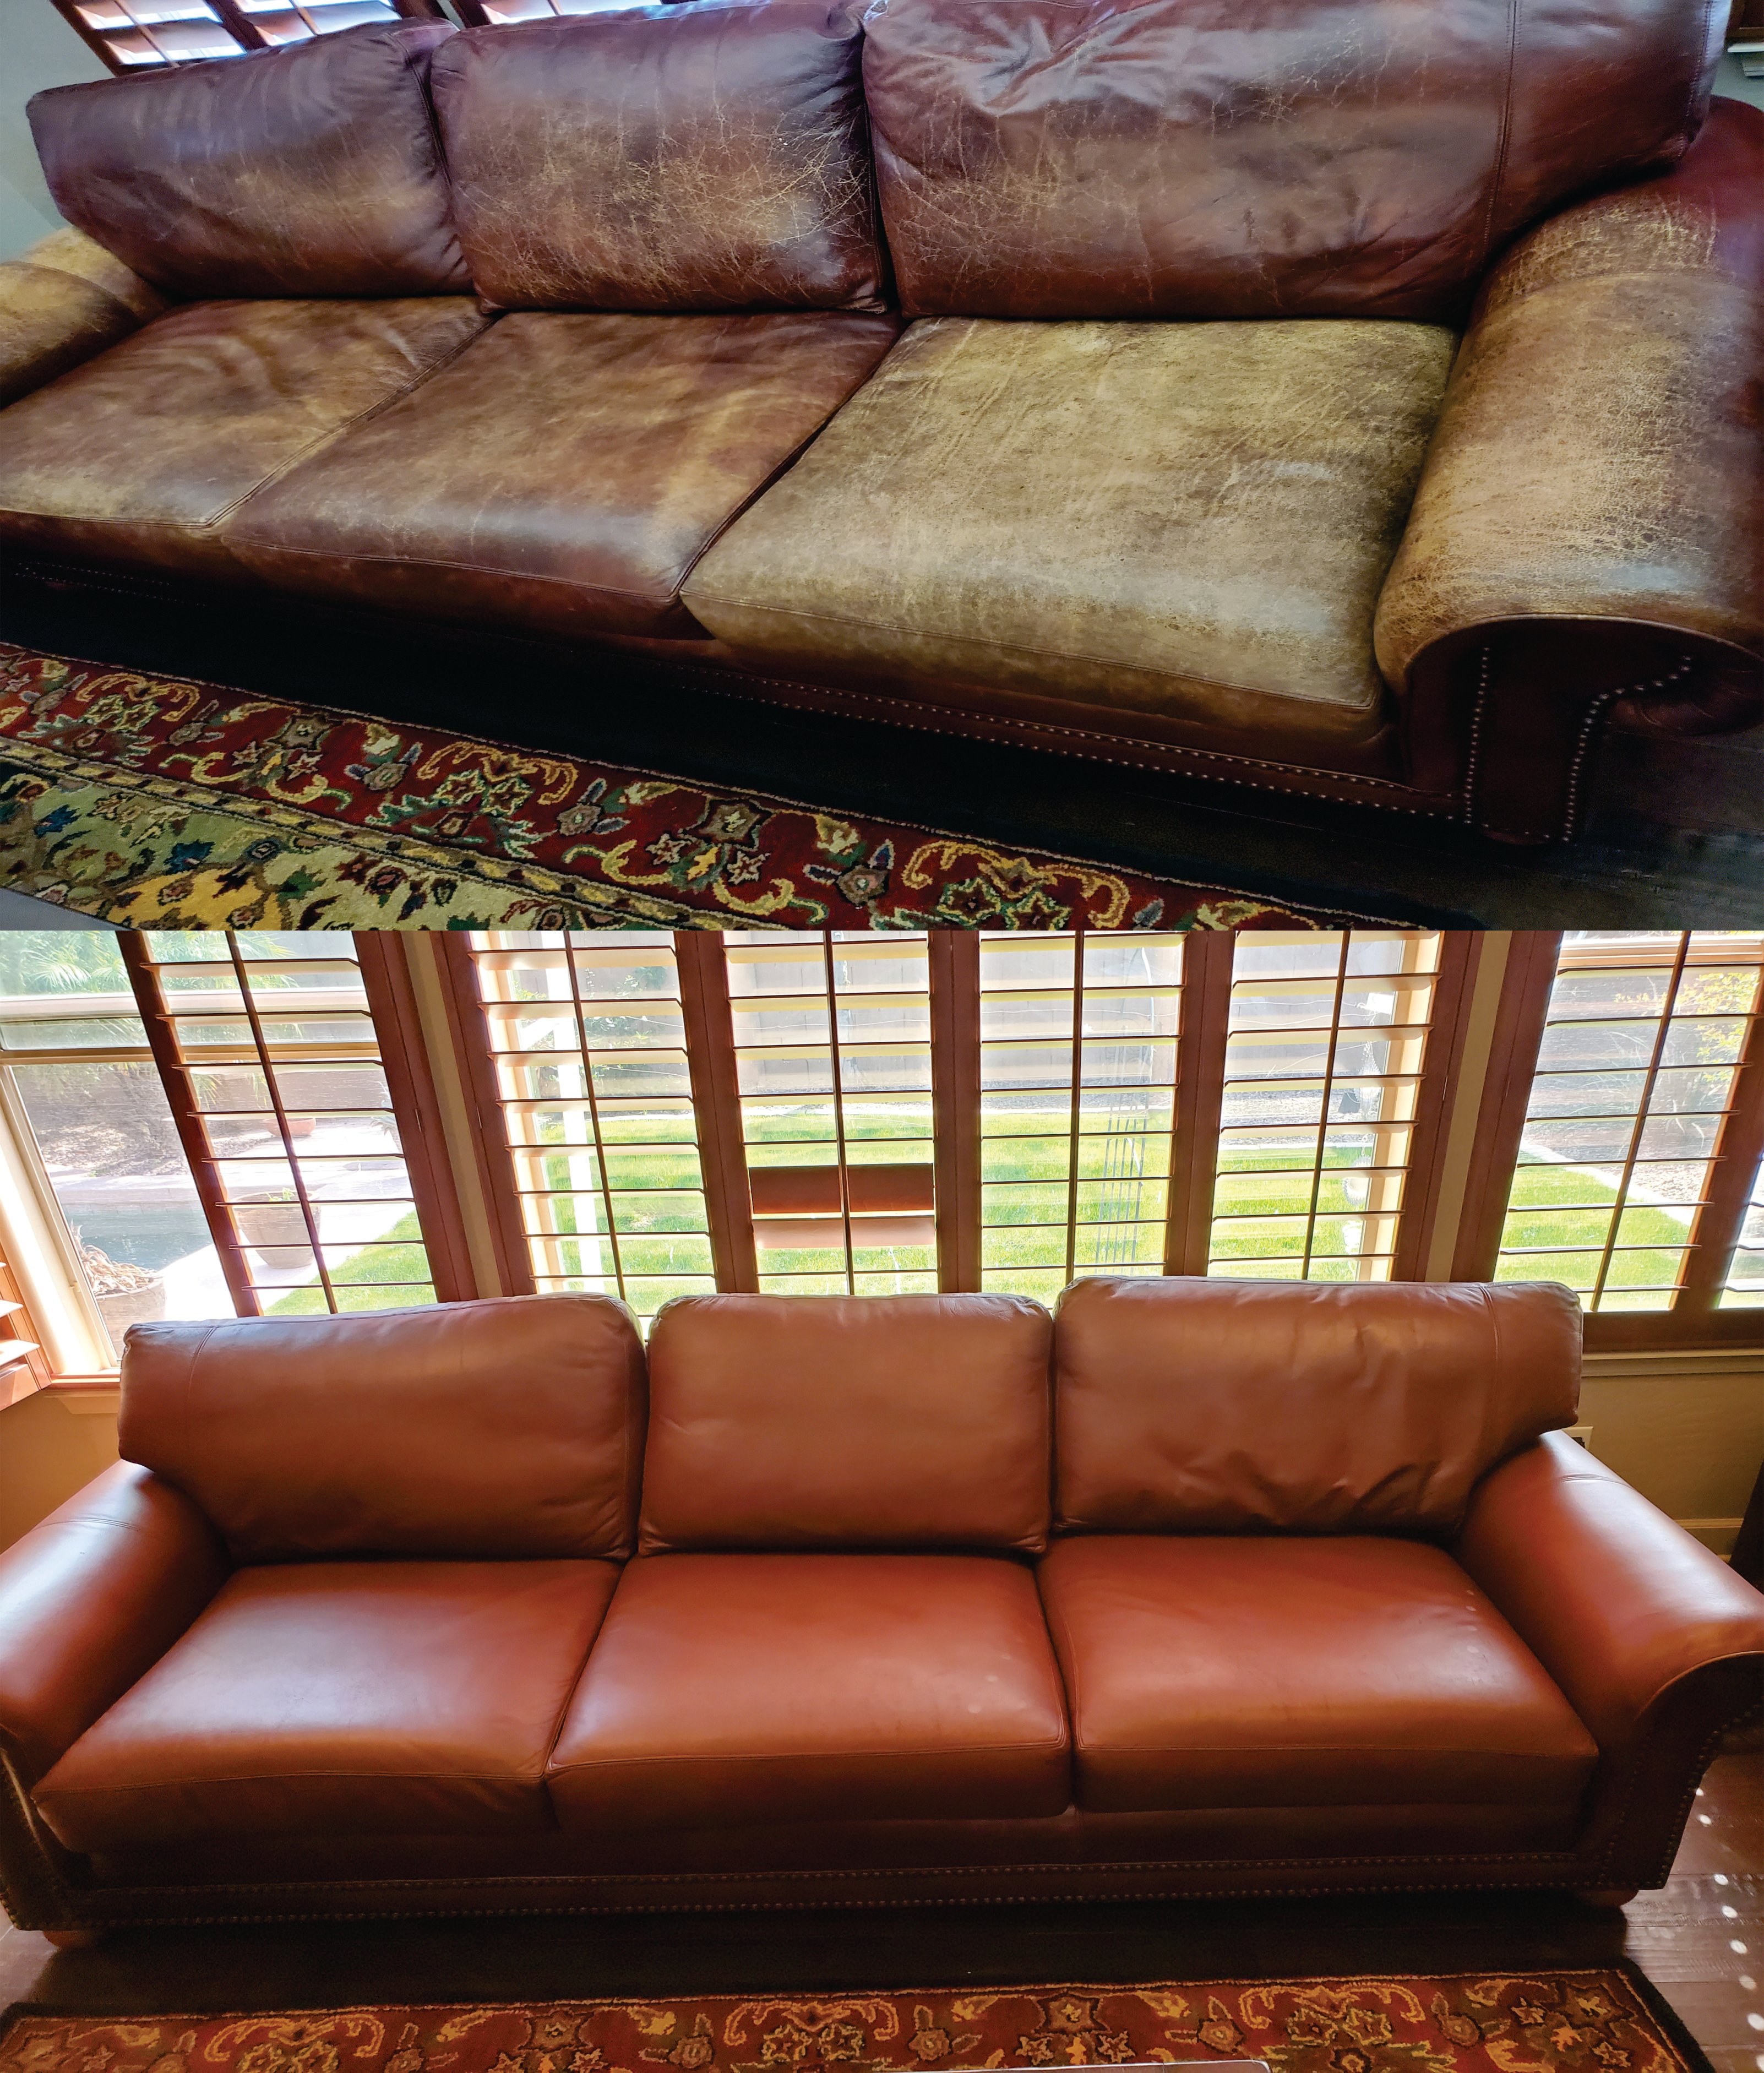 Leather Repair Services  Leather Furniture Repair And Restoration Services.